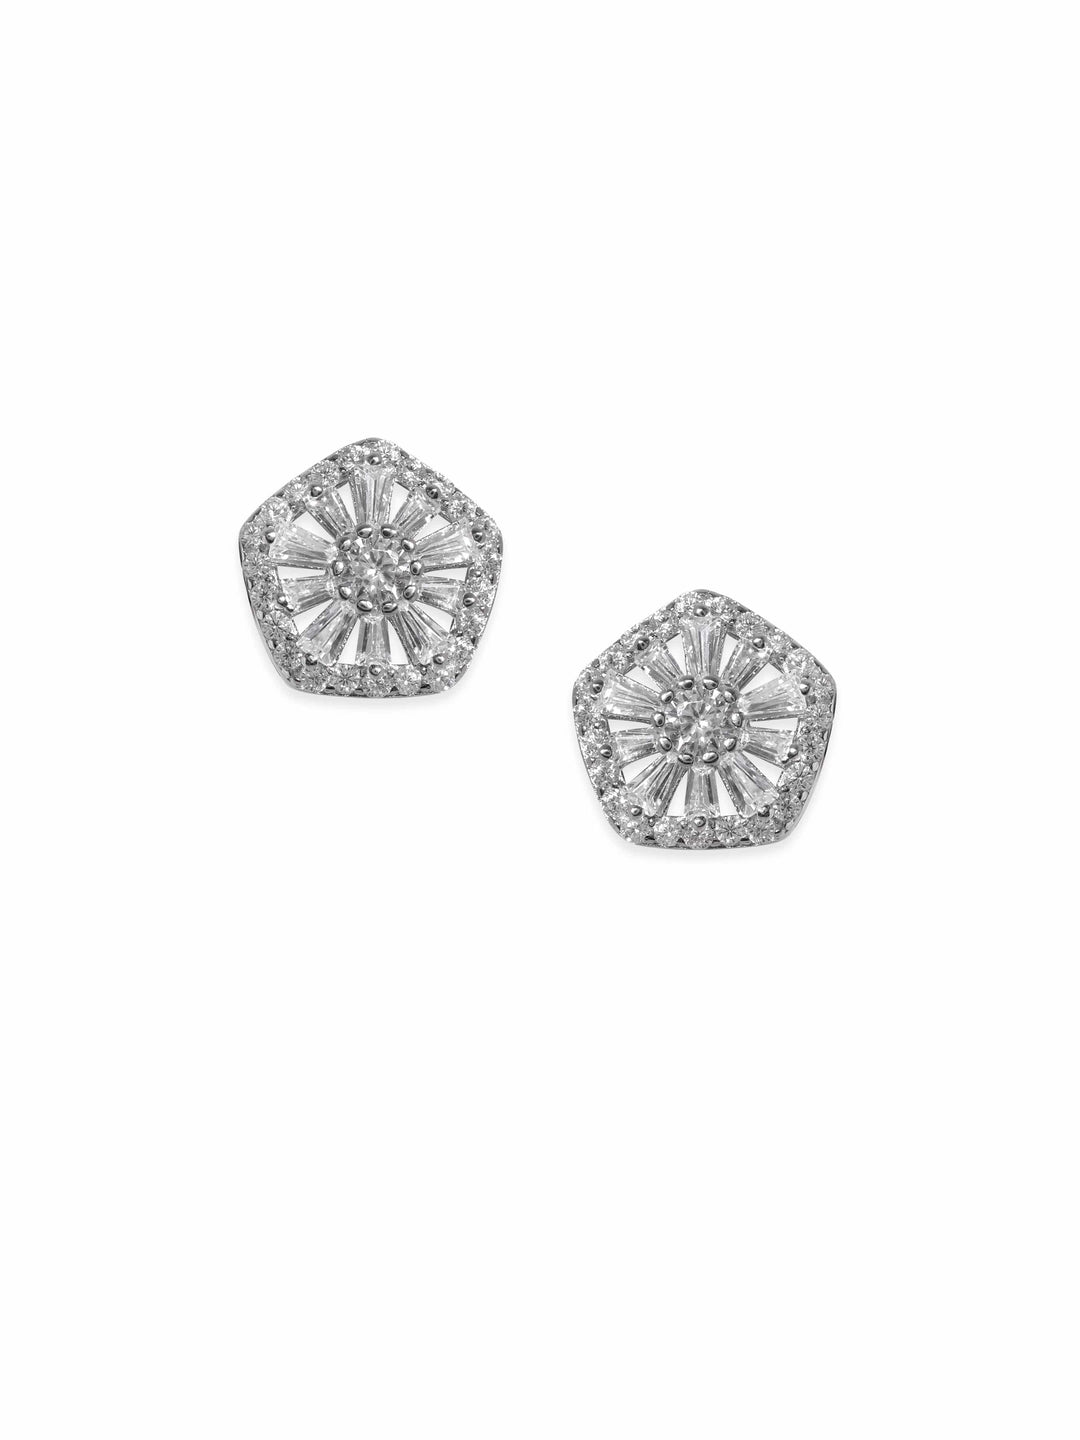 Rubans Silver Ad Silver Stud Earrings, Gleaming With Sophisticated Brilliance Earrings